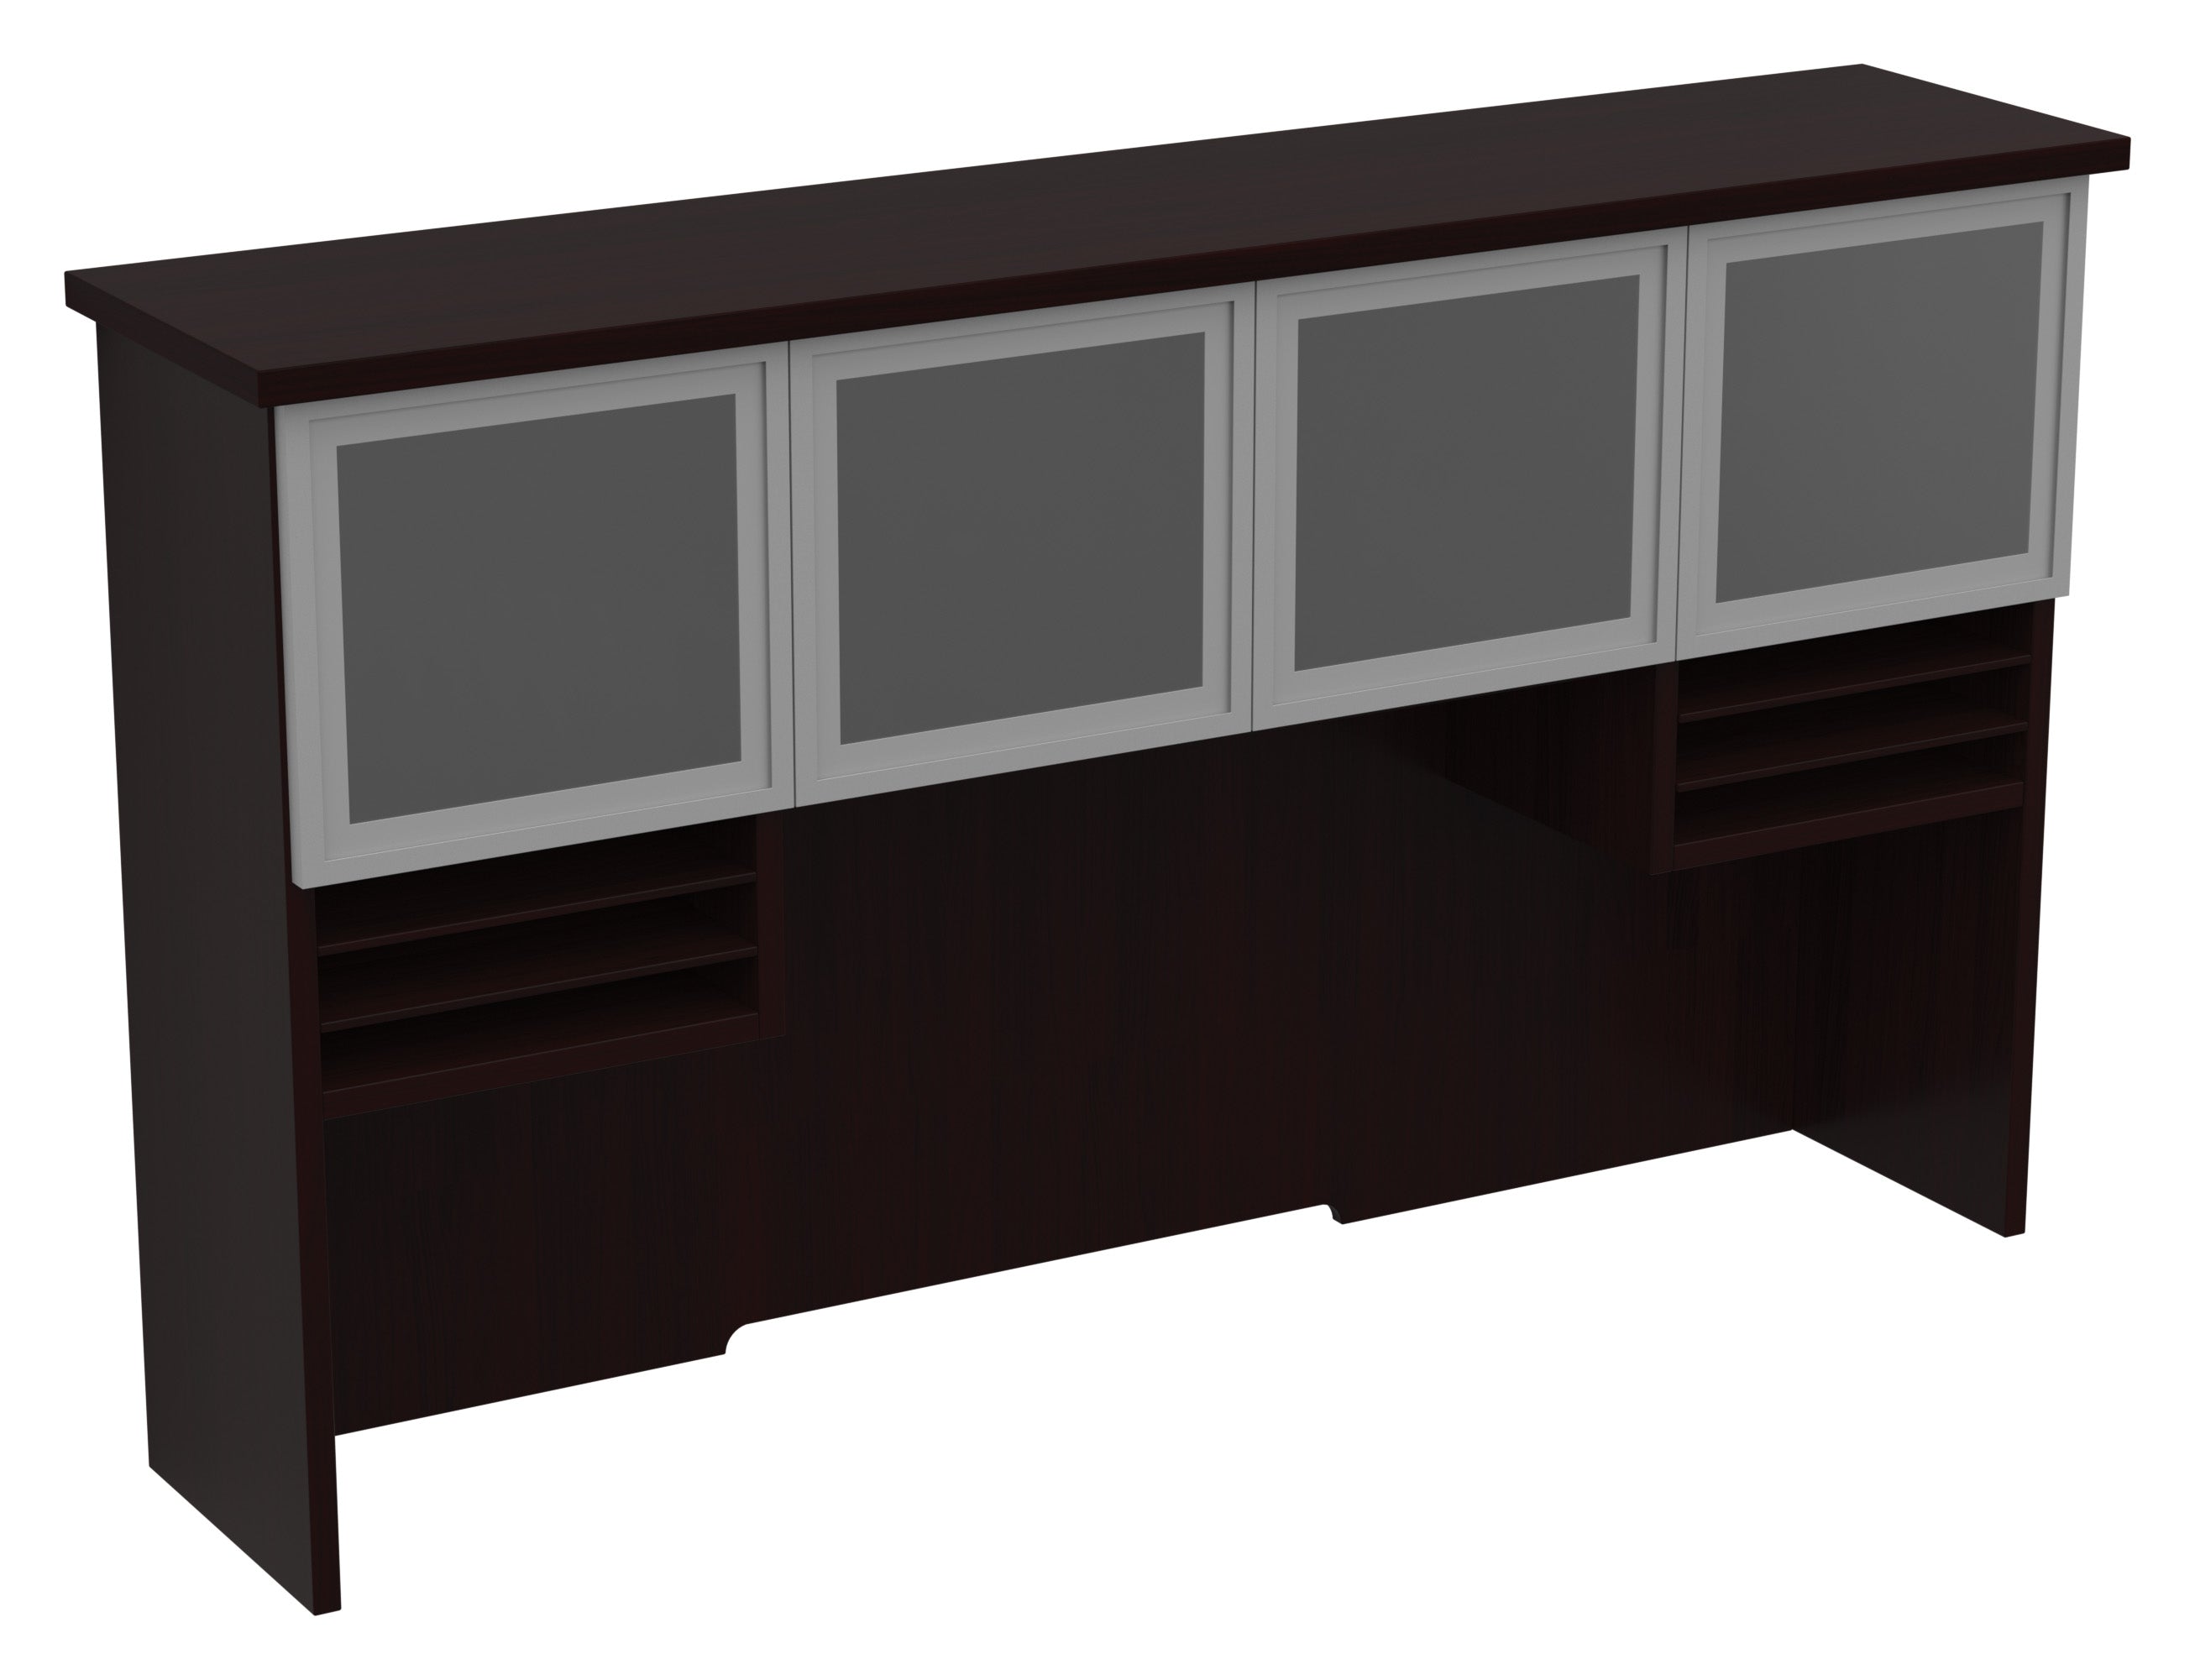 TUX-42 - Tuxedo Series Hutch with Glass Doors, by OSP